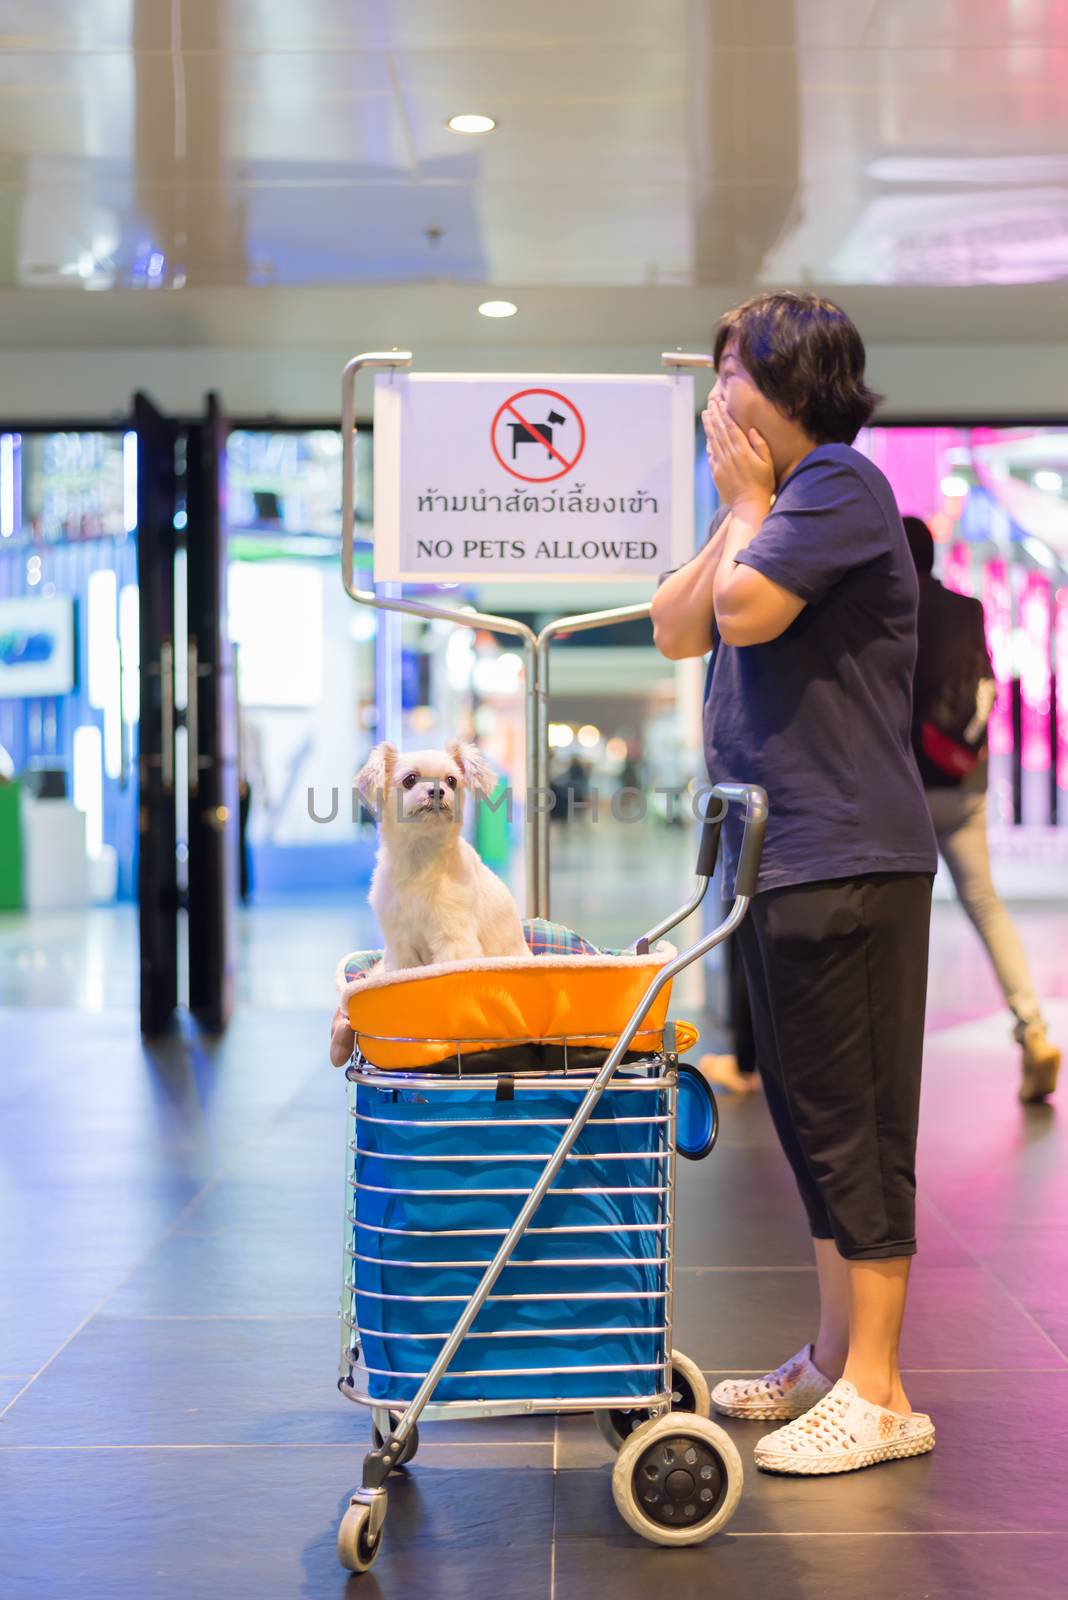 Asian woman feeling shocked when her and her pet (The dog) on shopping cart found warning sign No Pets Allowed at entrance door for exhibit hall or expo